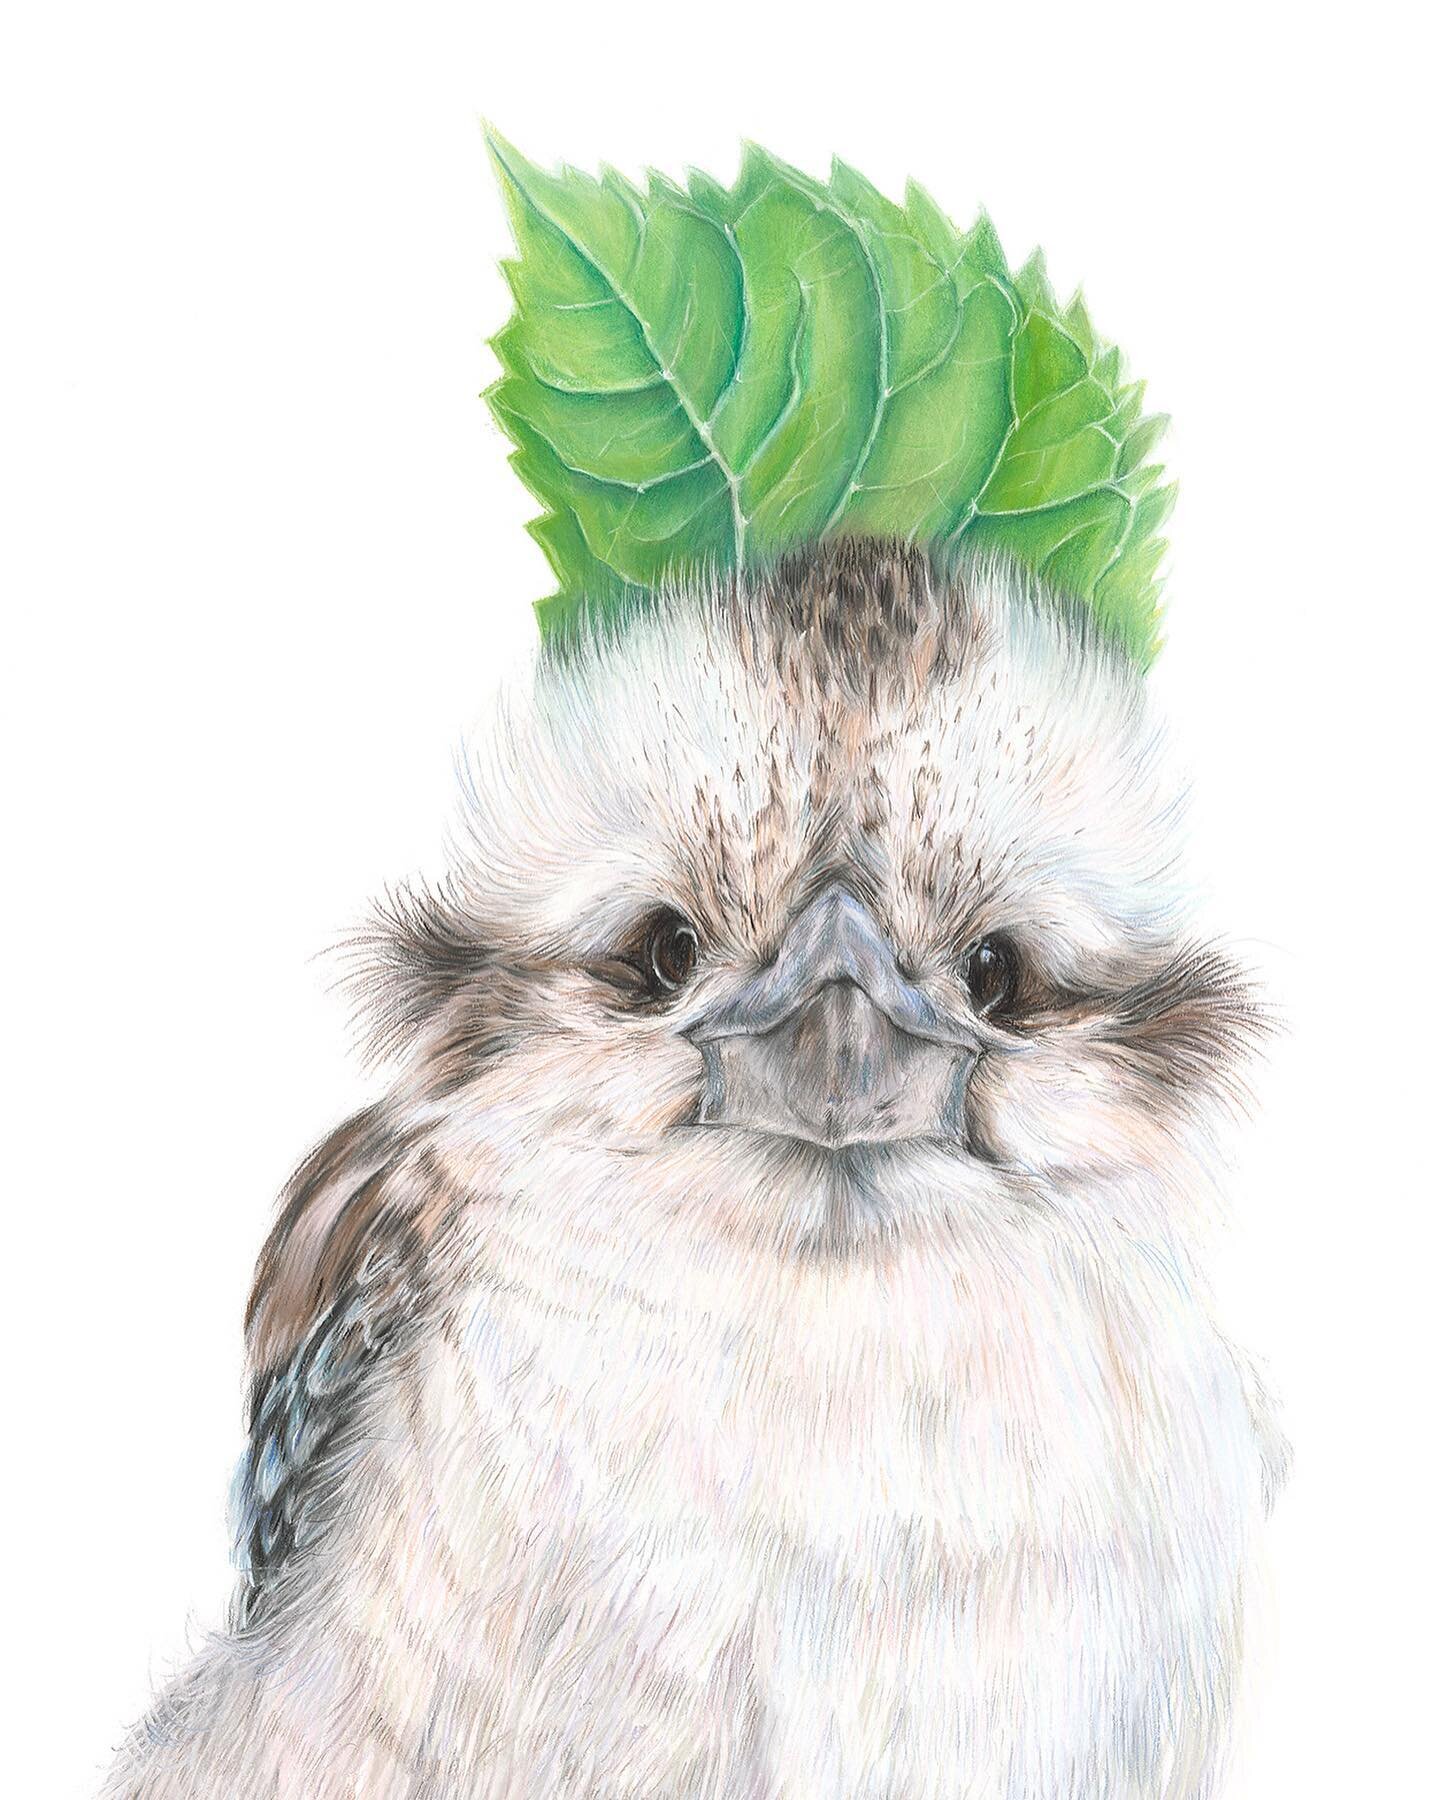 Happy New Year!! I hope everyone is feeling well, rested and ready for 2023. I have had a few requests for prints of the kookaburras, so I am opening up the special edition prints for a limited amount of time in January to celebrate the New Year! Fol